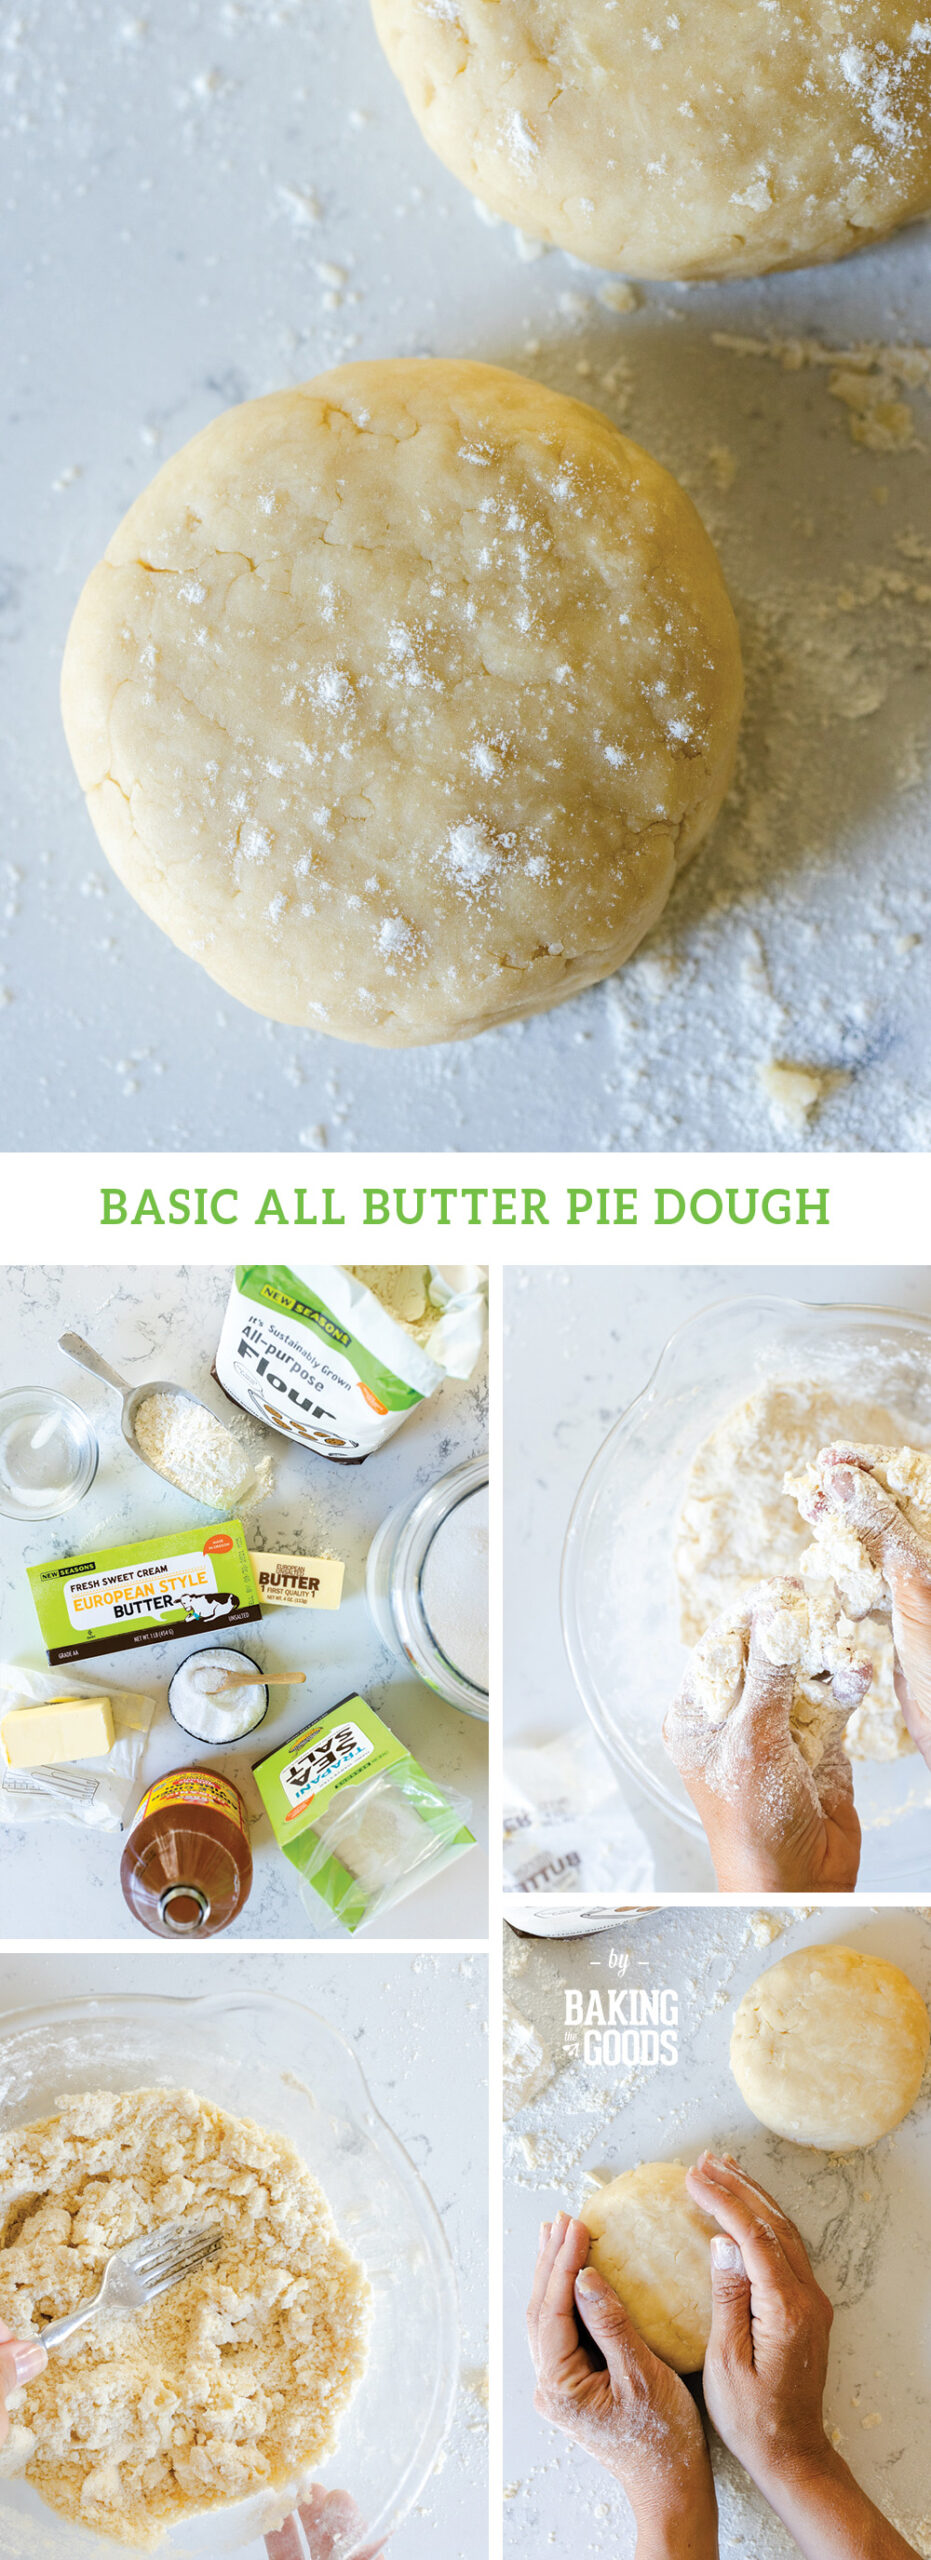 Basic All Butter Pie Dough by Baking The Goods